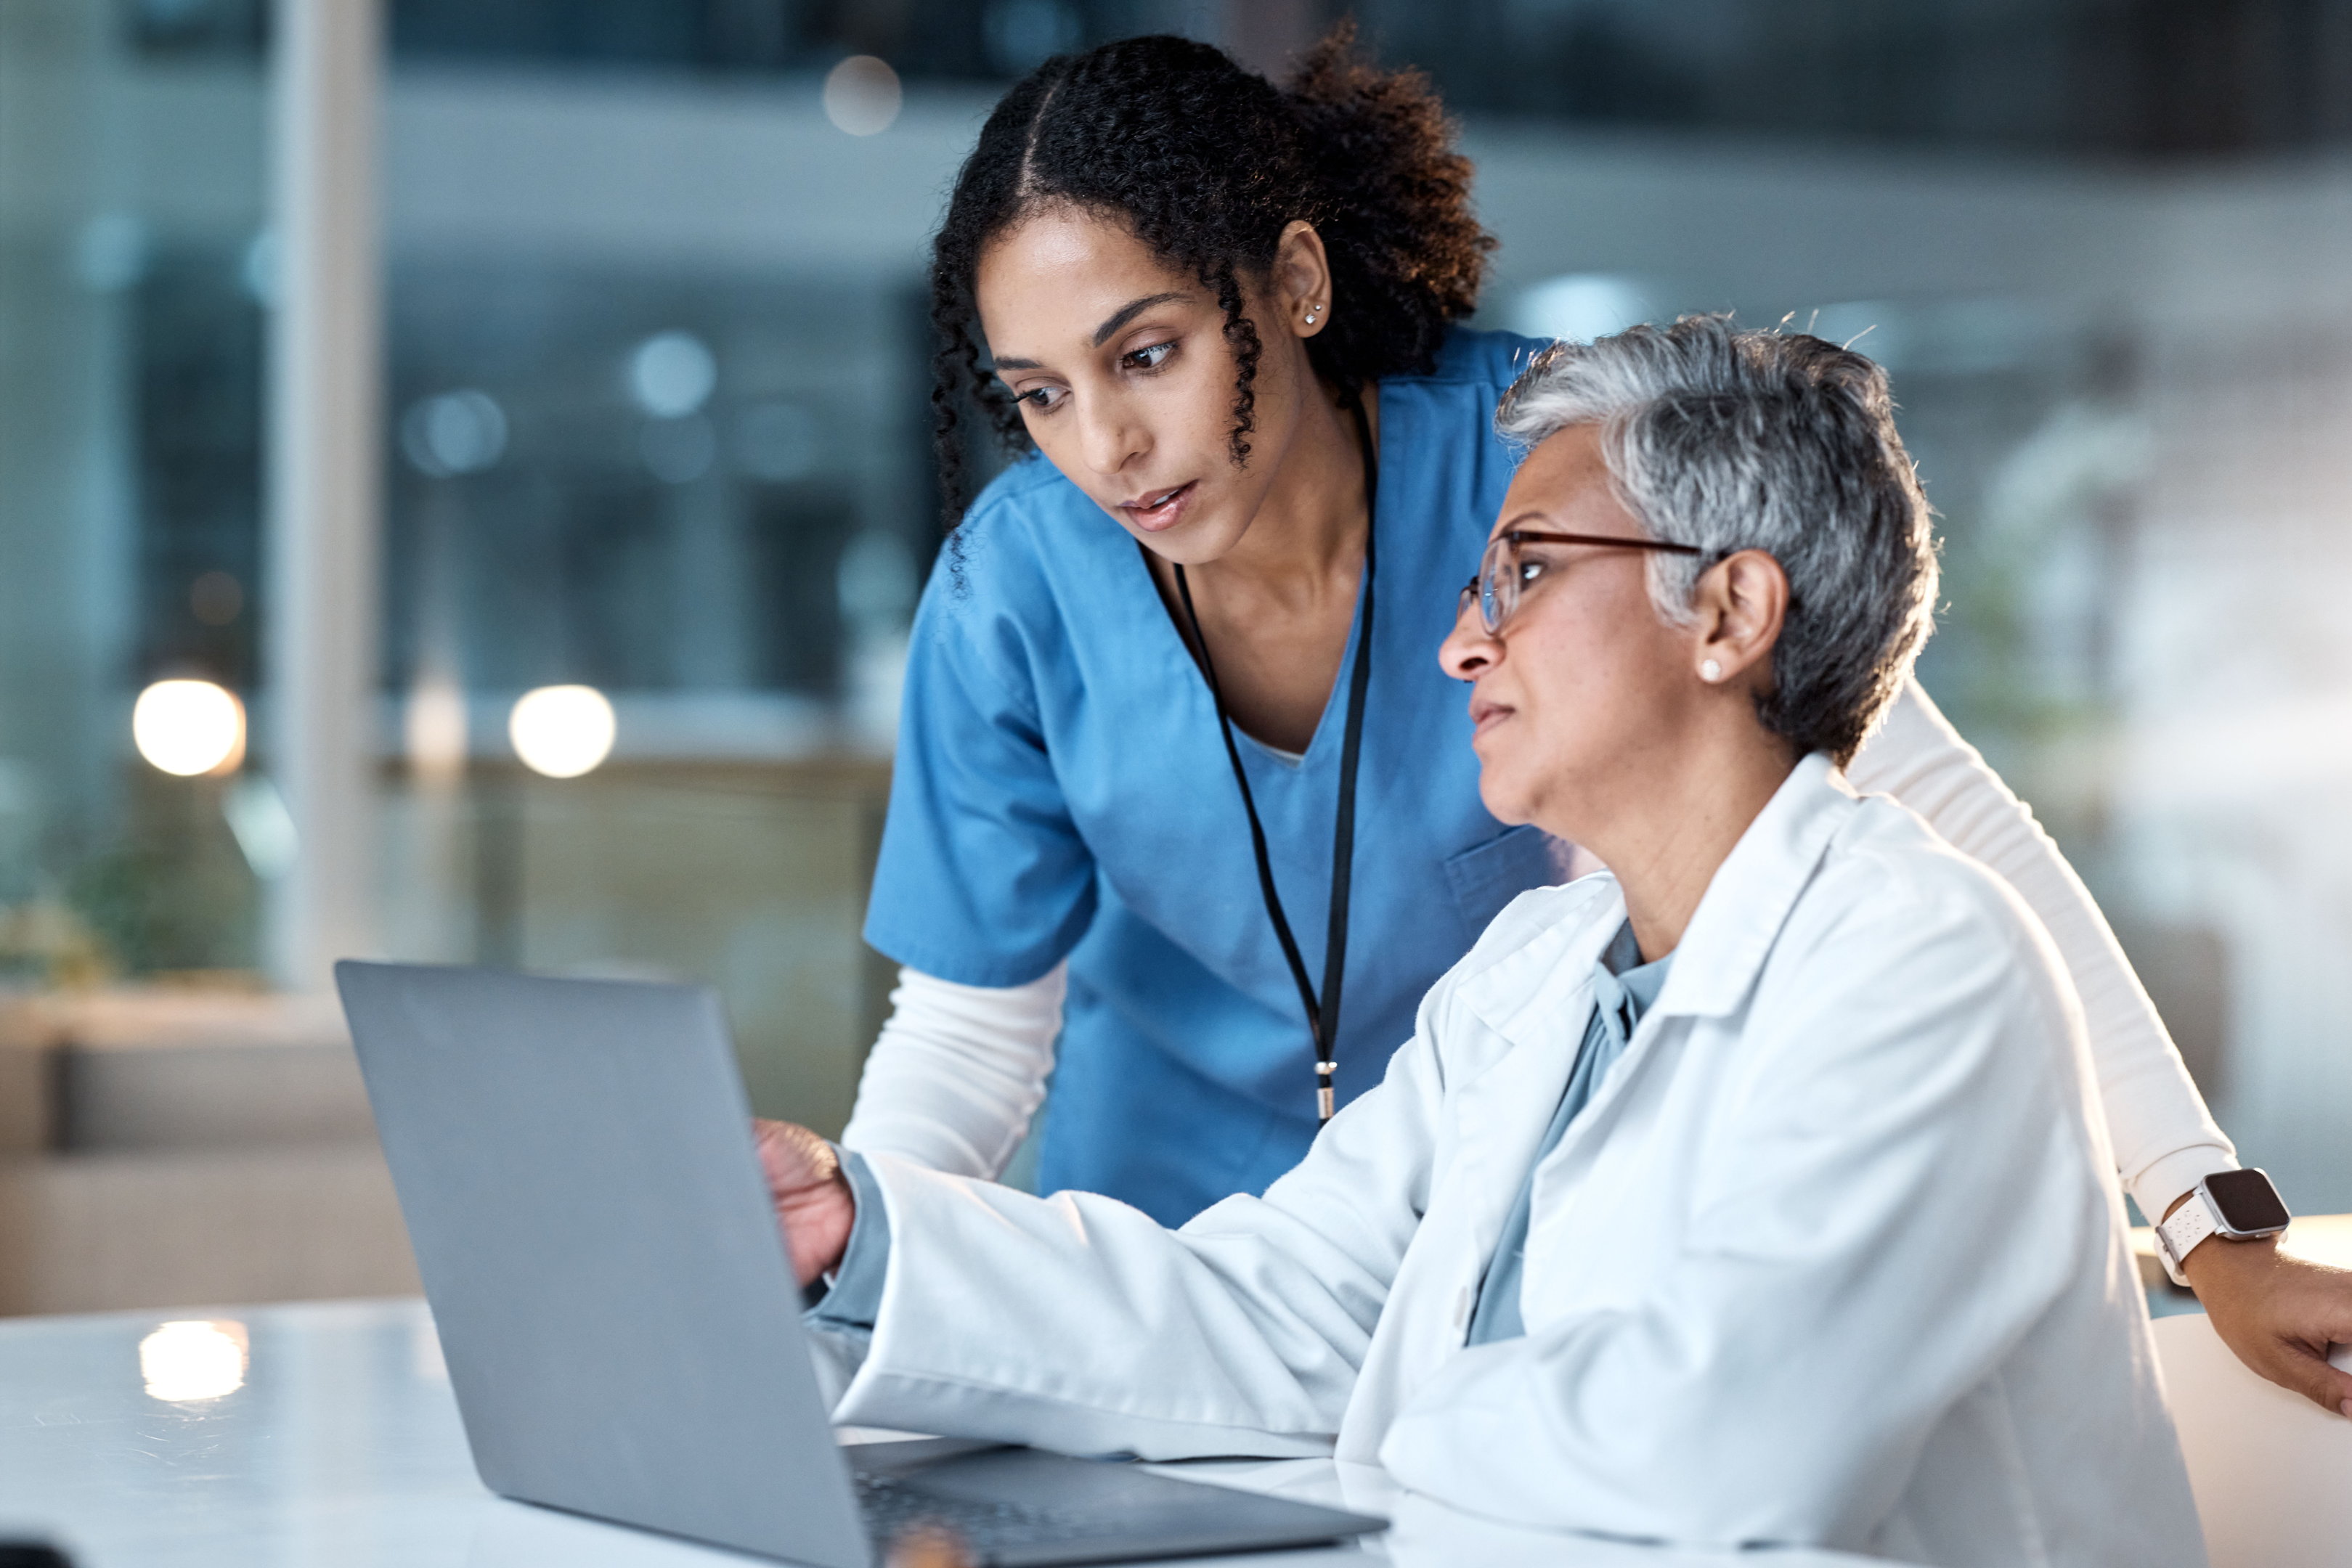 Reduce burden for health care professionals with remote patient monitoring, remote physiologic monitoring, connected care programs